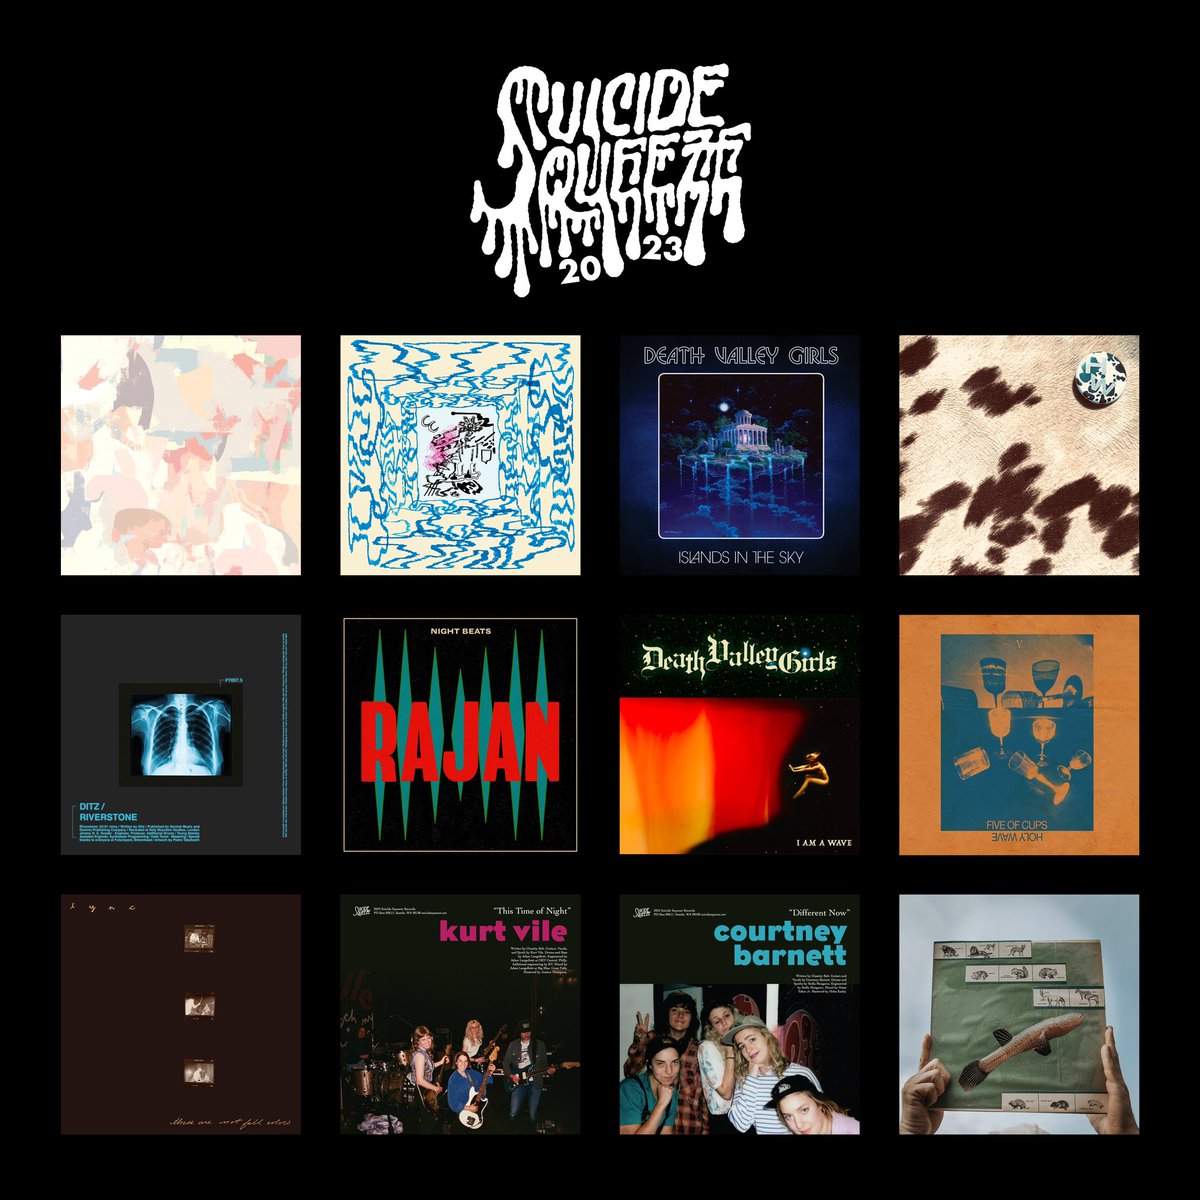 🚨 CONTEST 🚨

We’re giving away one 2023 GRAND PRIZE and two runner-up prizes!!! Enter to win via the link below. 

instagram.com/suicidesqueeze 

#holywave #deathvalleygirls #ditz #nightbeats #lync #kurtvile #courtneybarnett #cottonjones #vinyl #fanappreciation #music #seattle